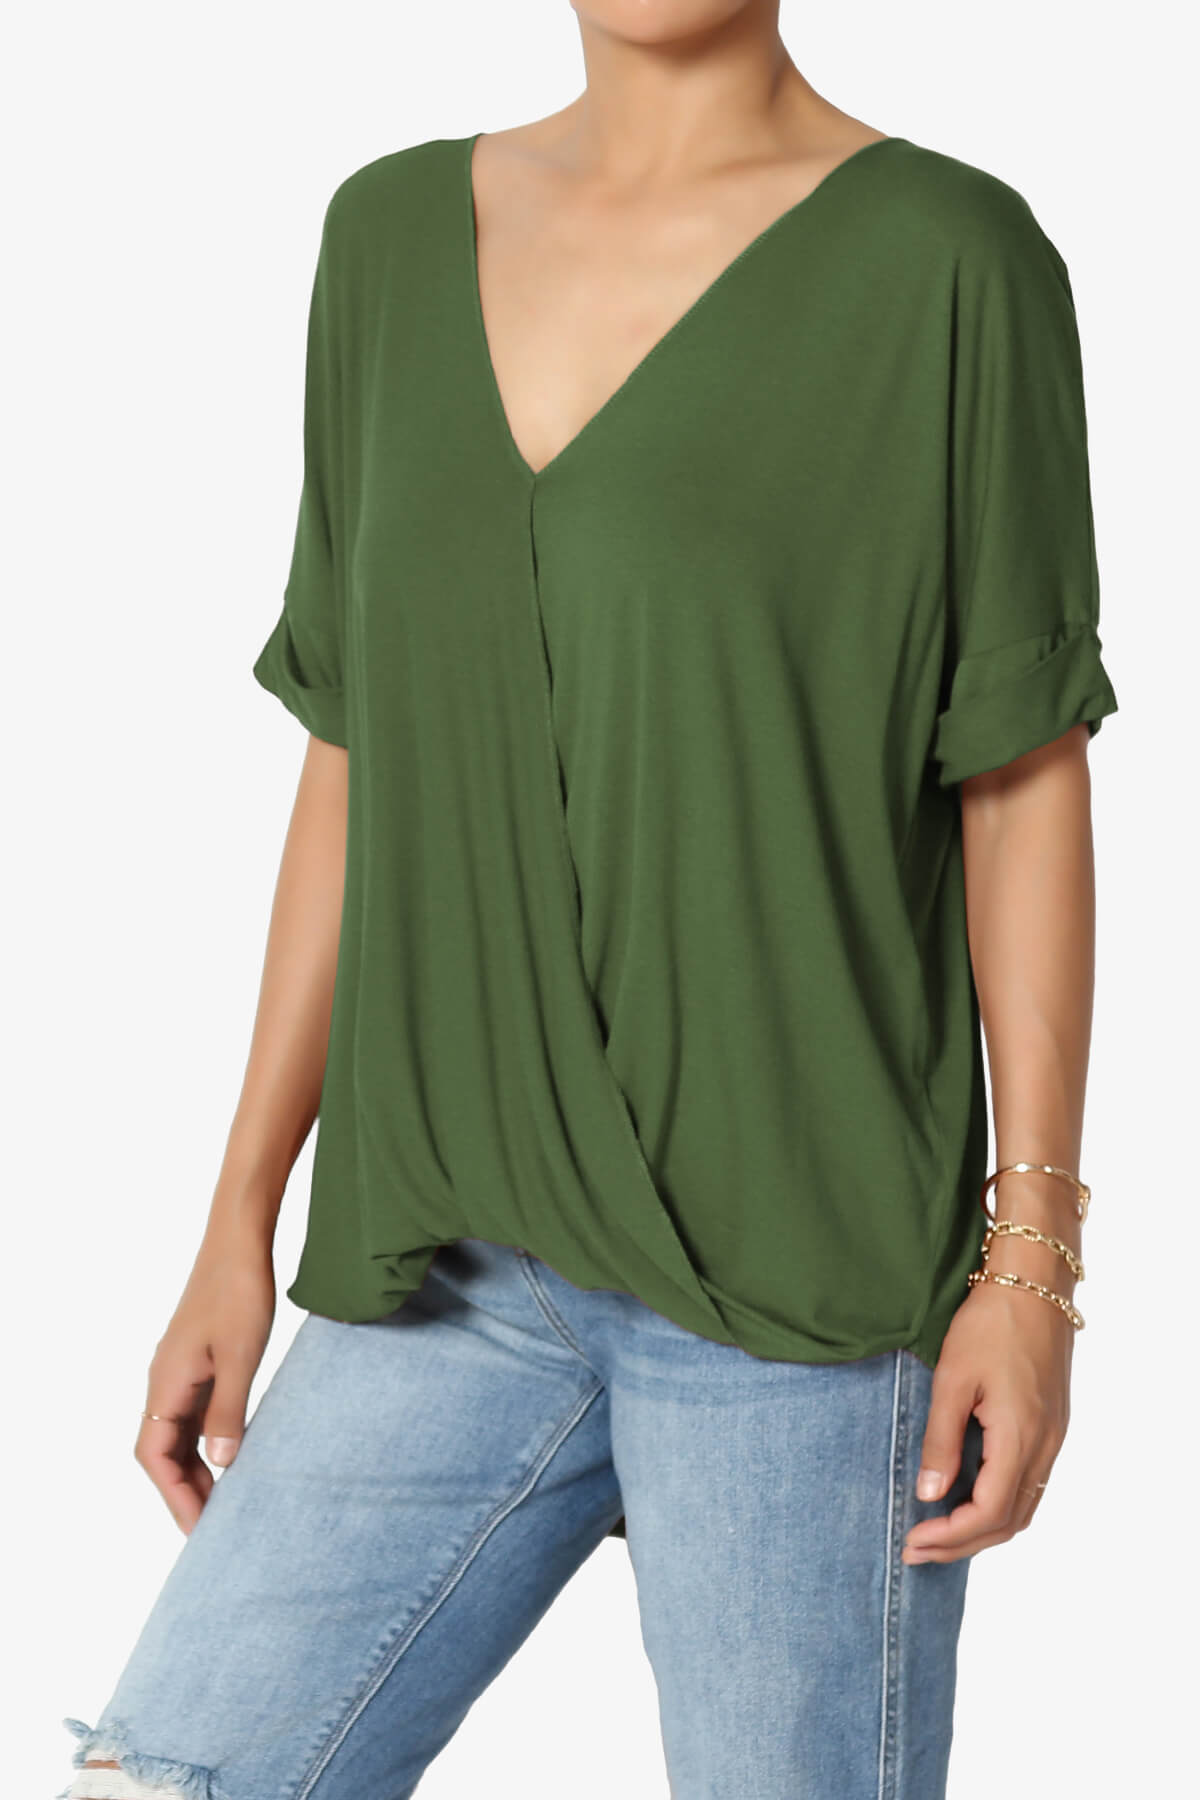 Load image into Gallery viewer, Tackle Wrap Hi-Low Crepe Knit Top ARMY GREEN_3
